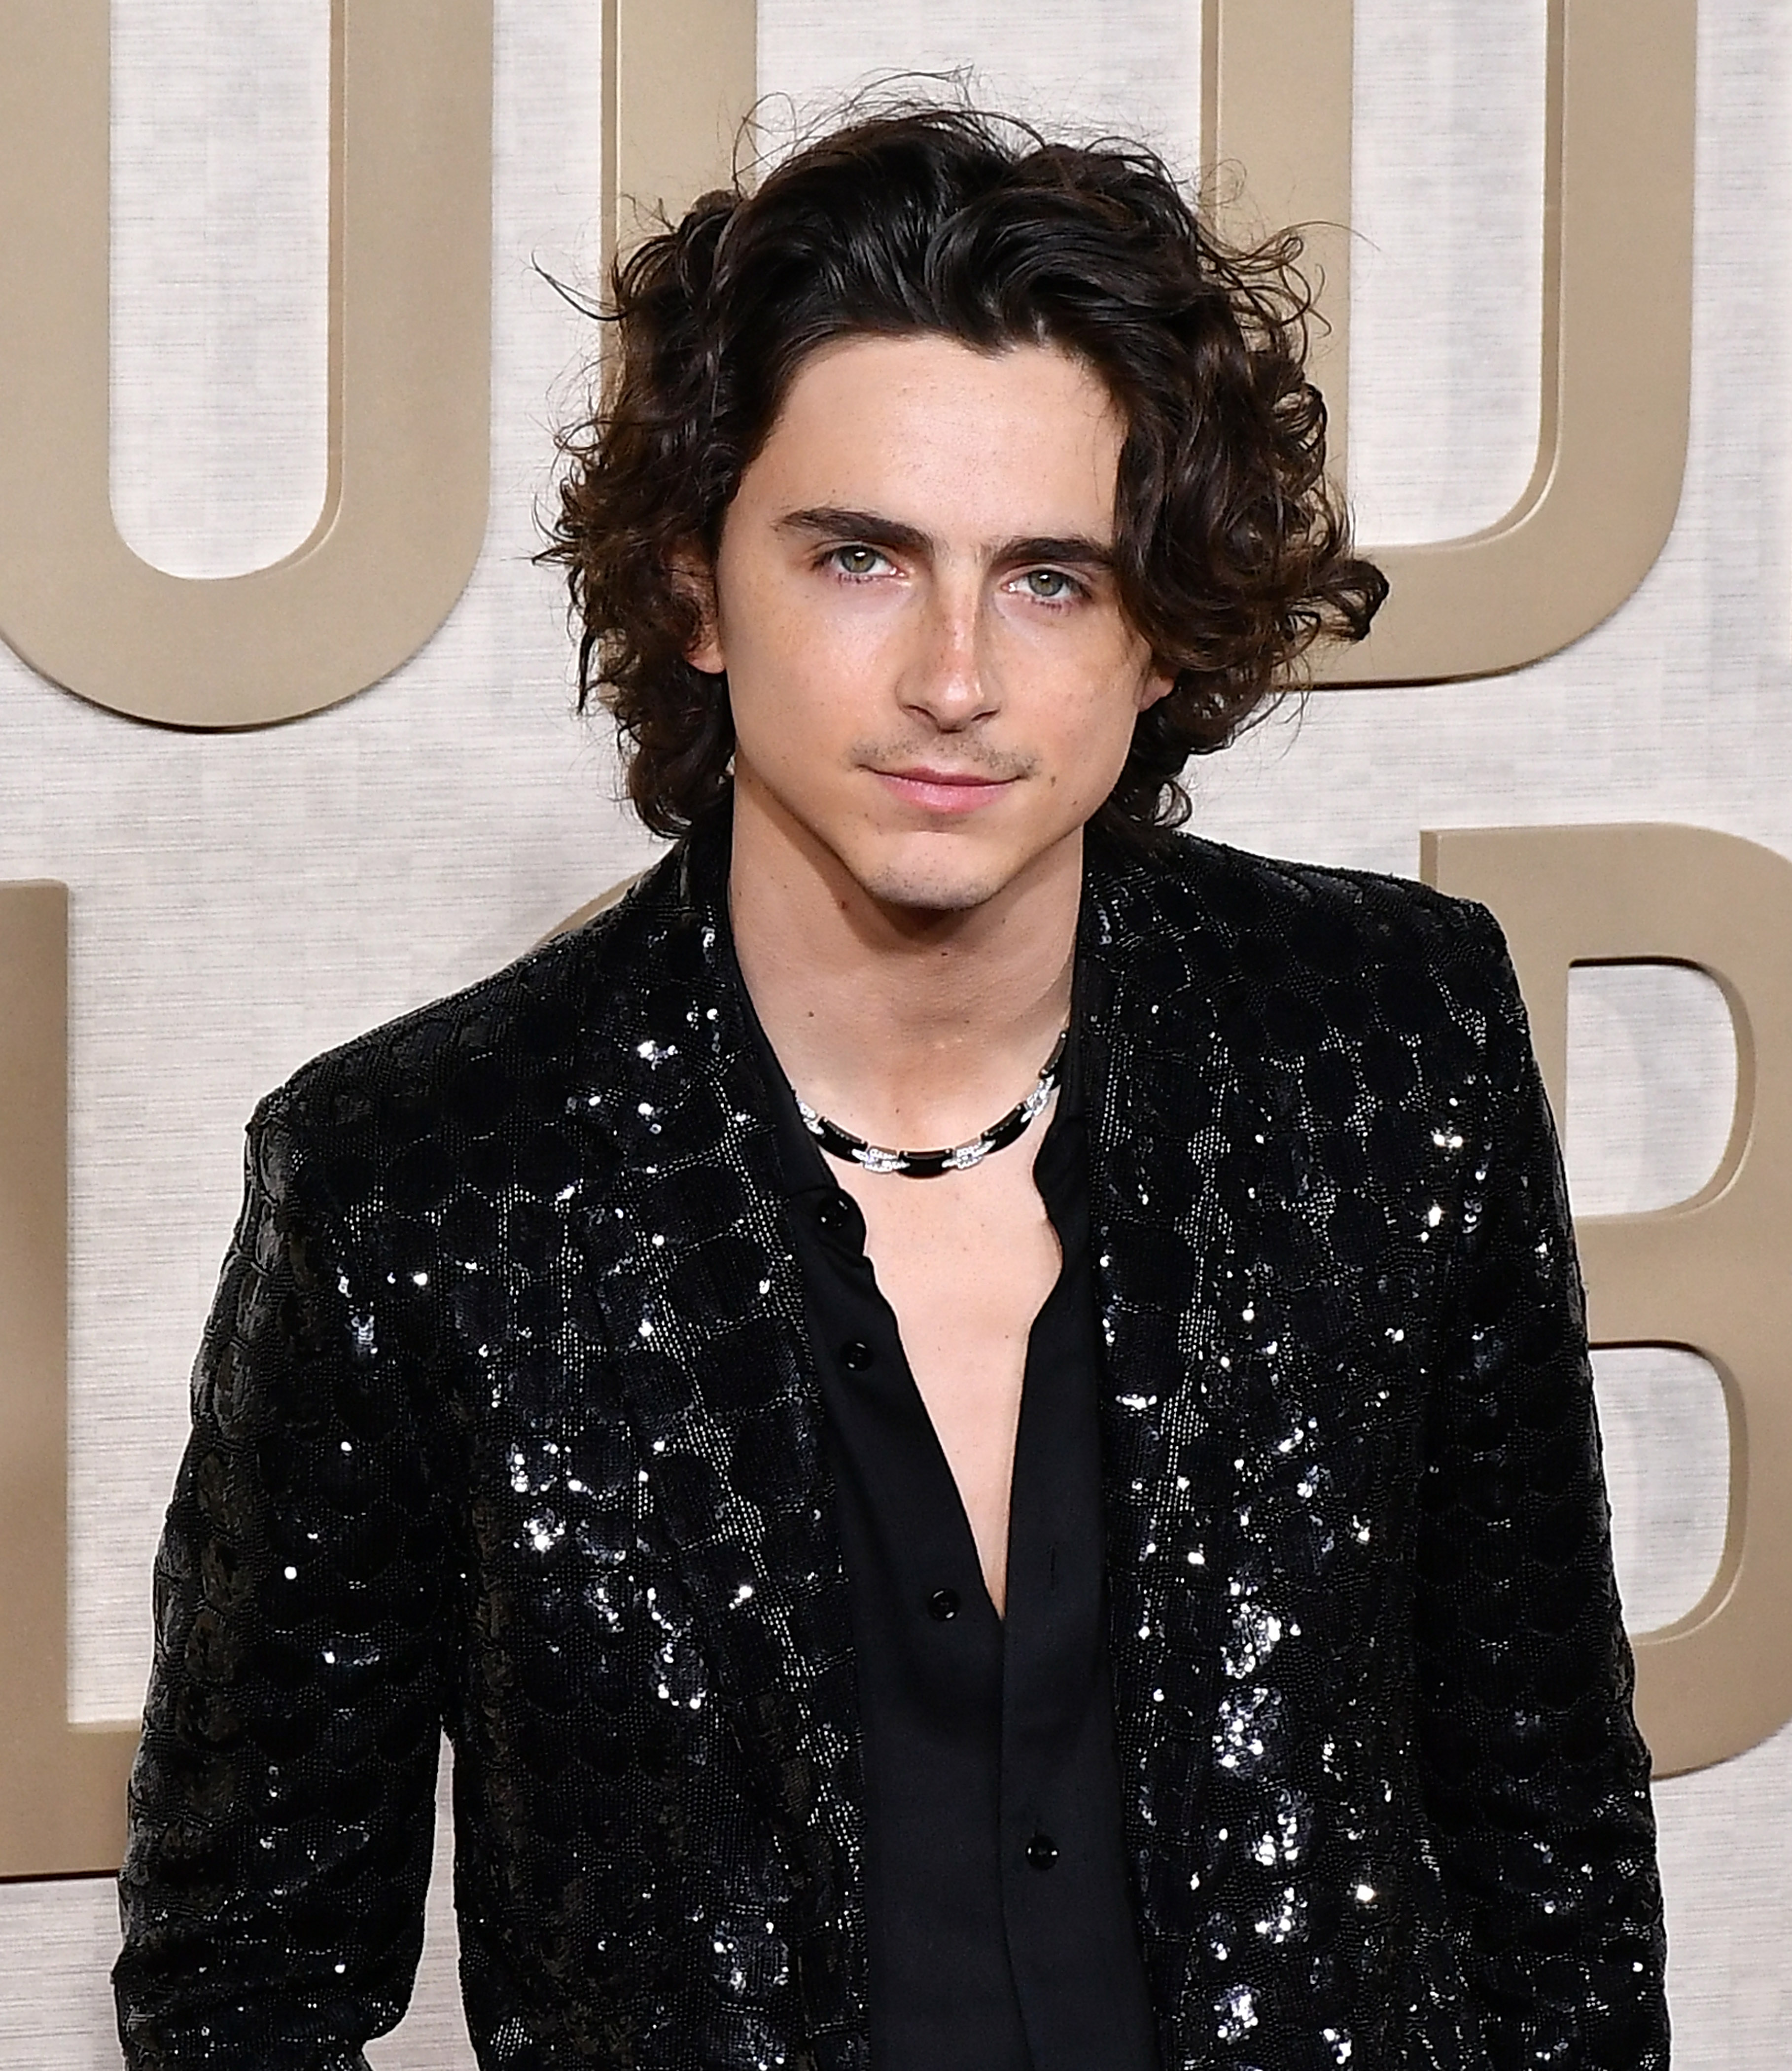 Timothée's A-list status has been cemented by the recent box office success of Wonka